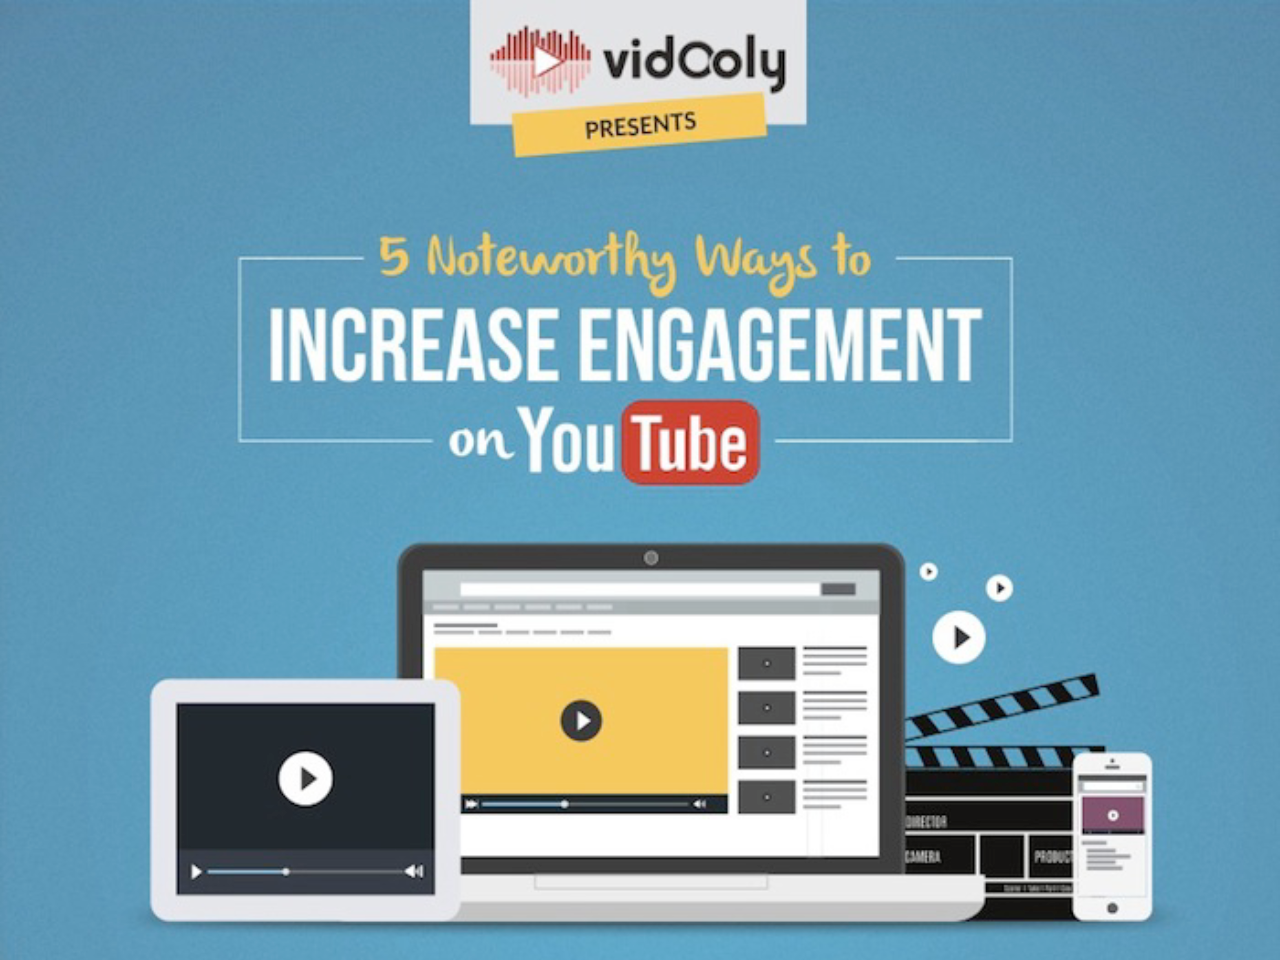 5 Social Media Tips For Expanding YouTube Engagement [InfoGraphic]